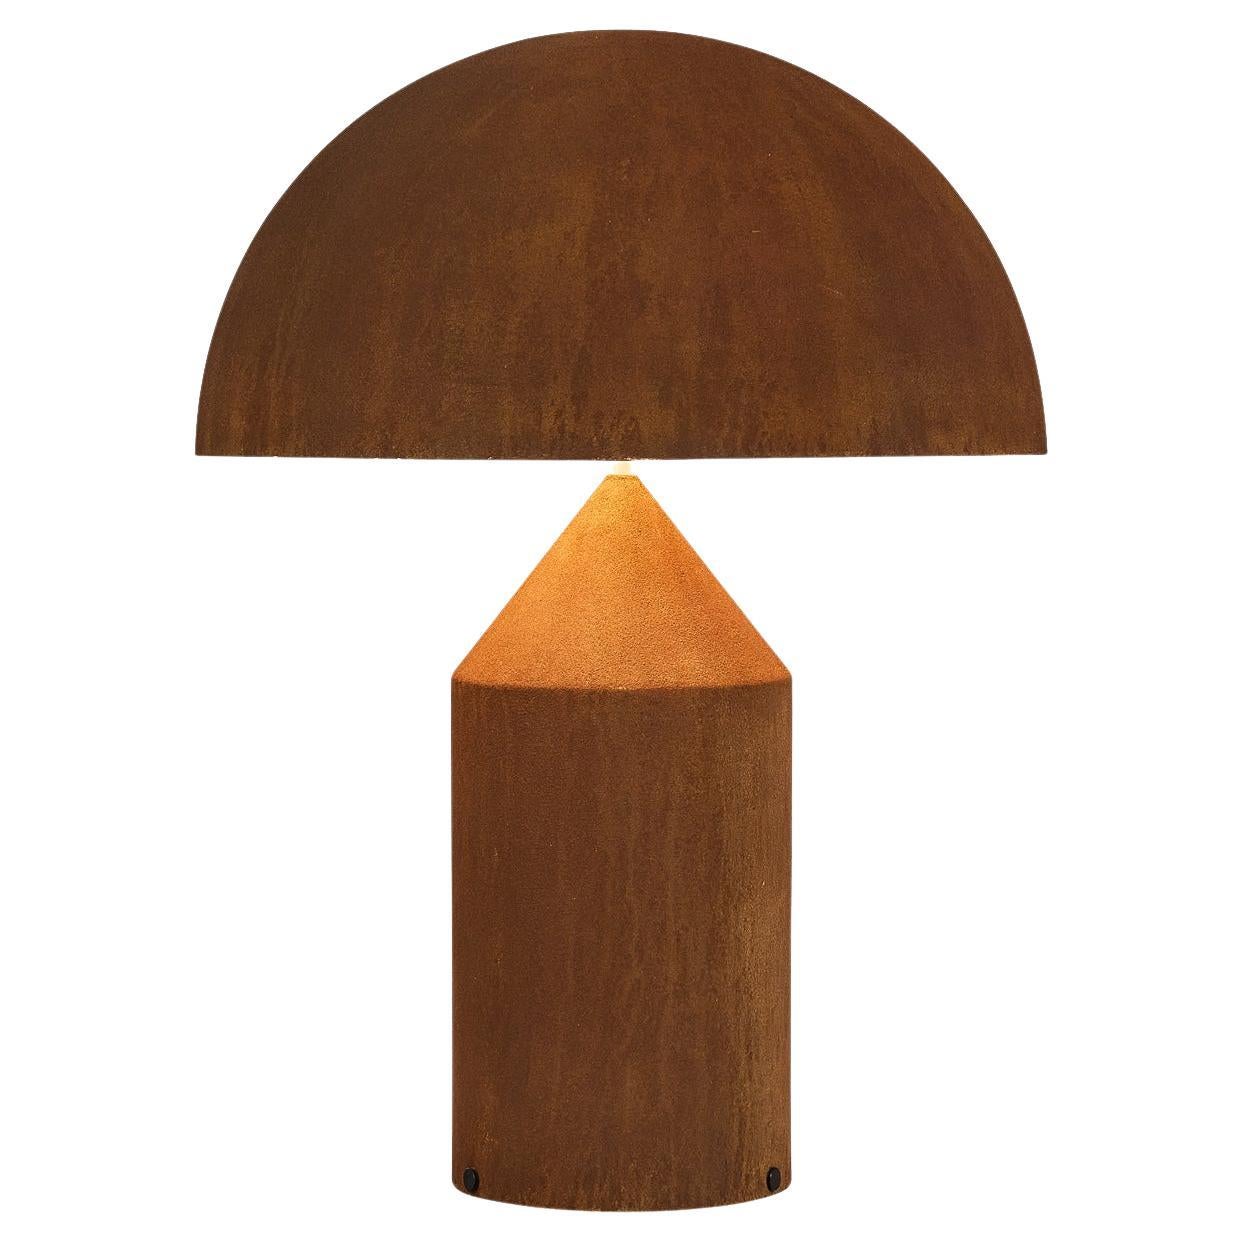 Vico Magistretti for Oluce 'Atollo' First Edition '233' Table Lamp  For Sale